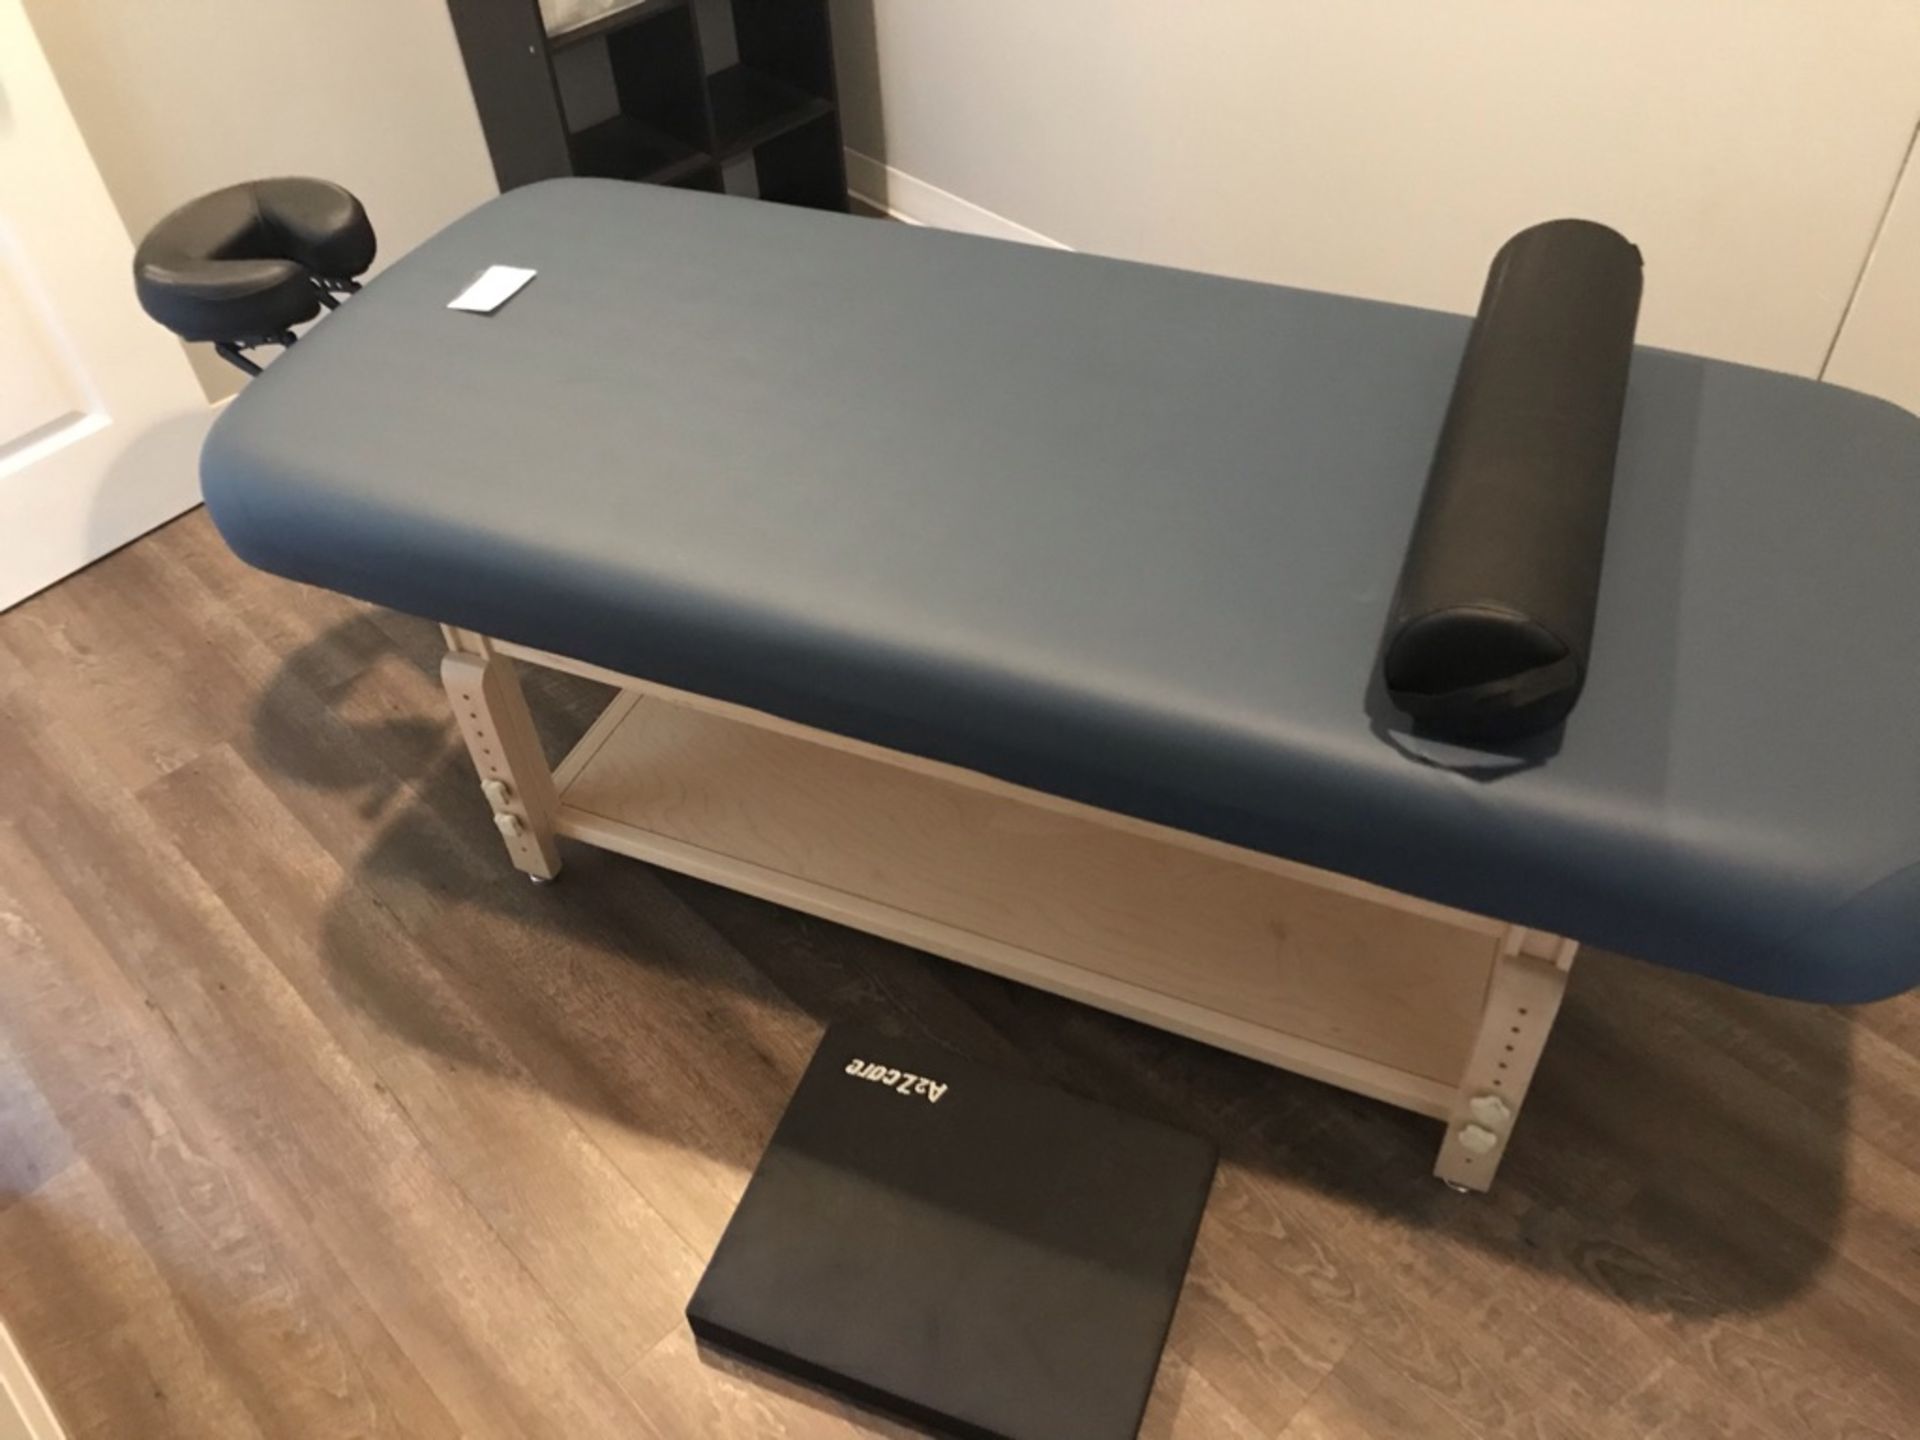 EARTHLITE SEDONA SPA TREATMENT TABLE, BLUE, WITH FACE CRADLE, LEG SUPPORT, AND A2ZCARE FLOOR PAD - Image 3 of 6